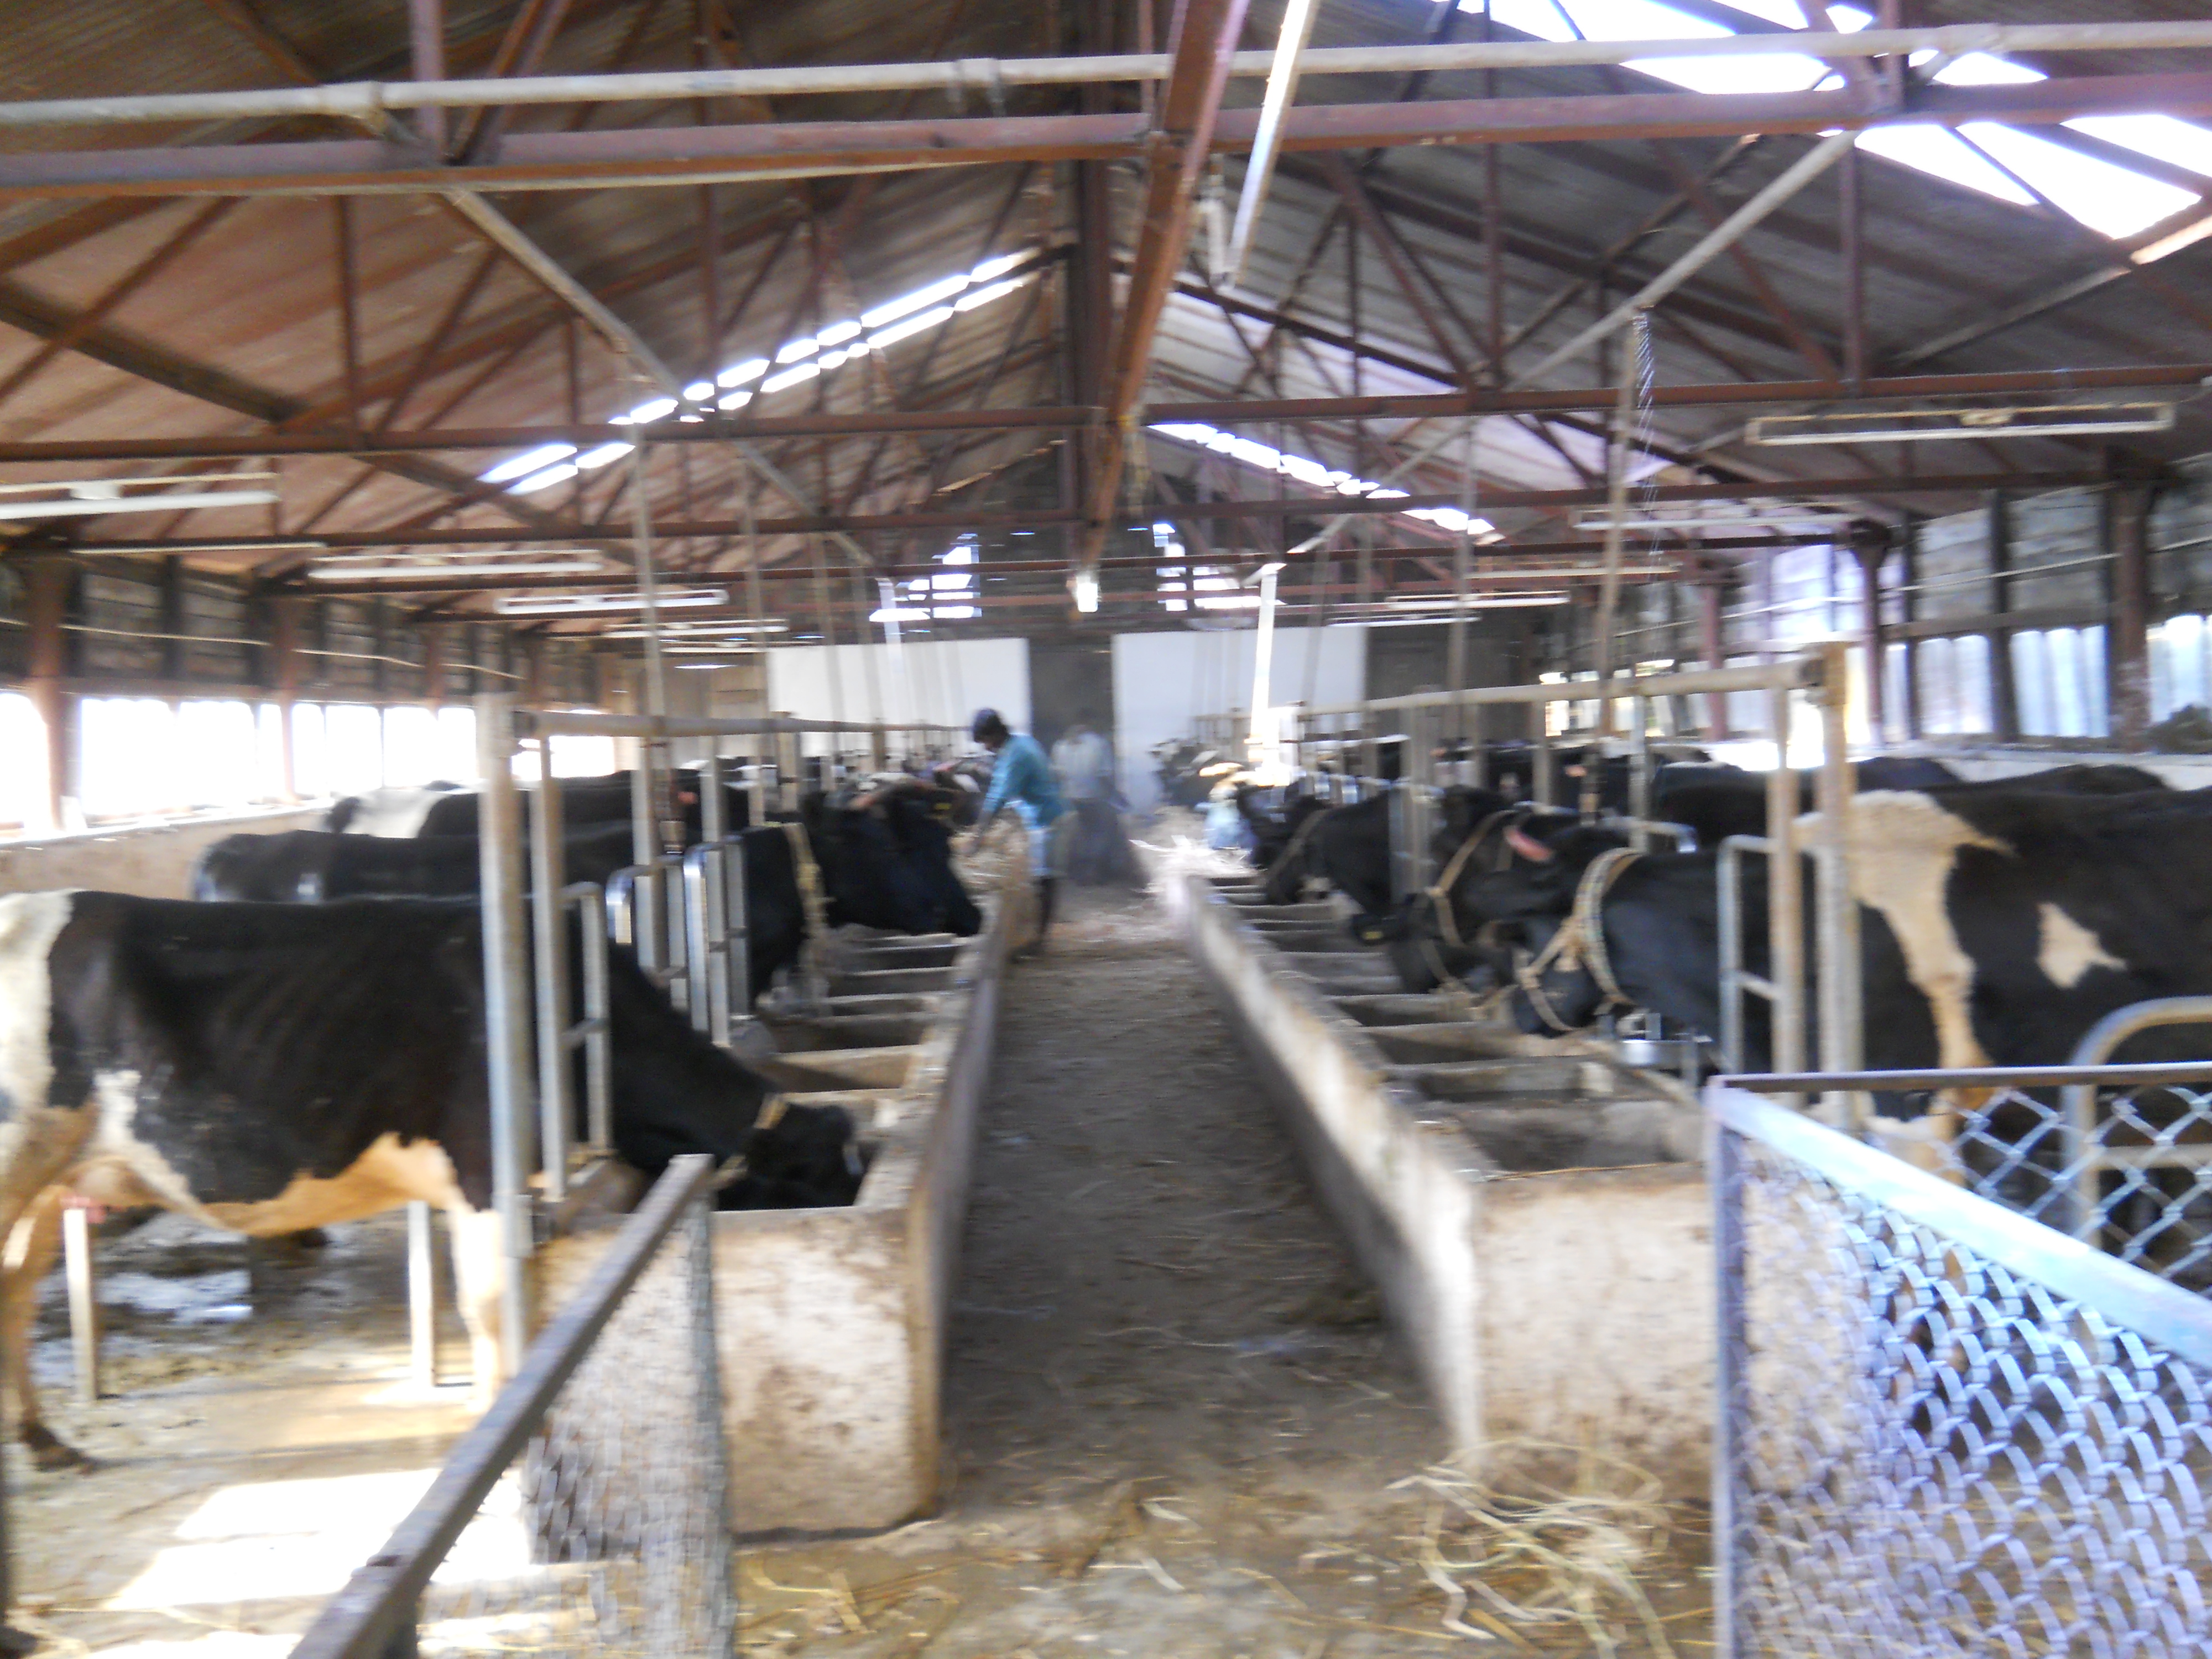 cow shed at the farm. They showed the milking machines too